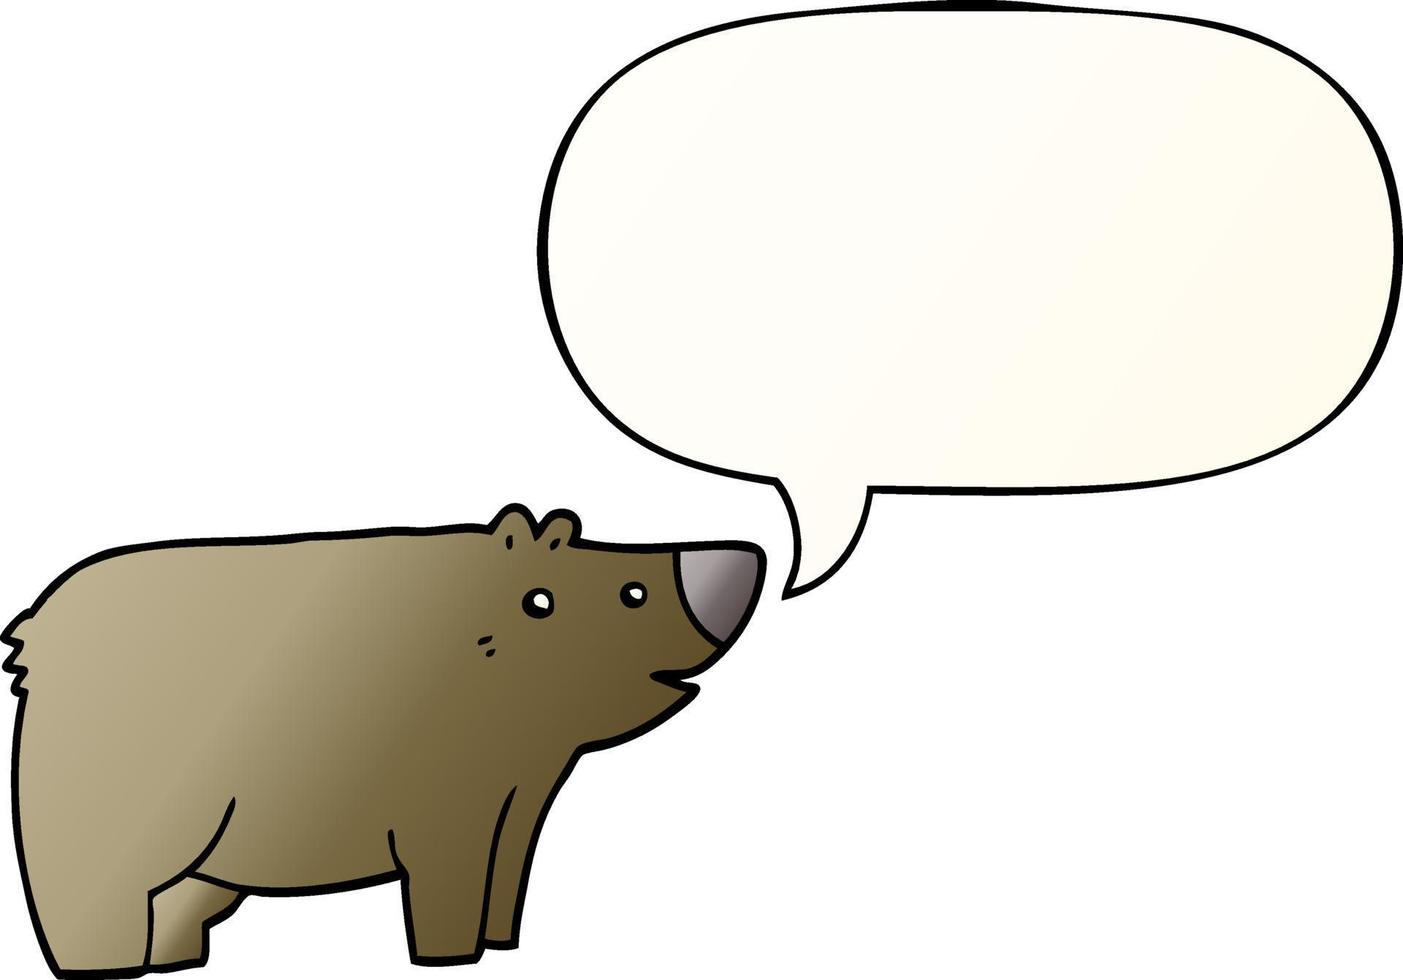 cartoon bear and speech bubble in smooth gradient style vector